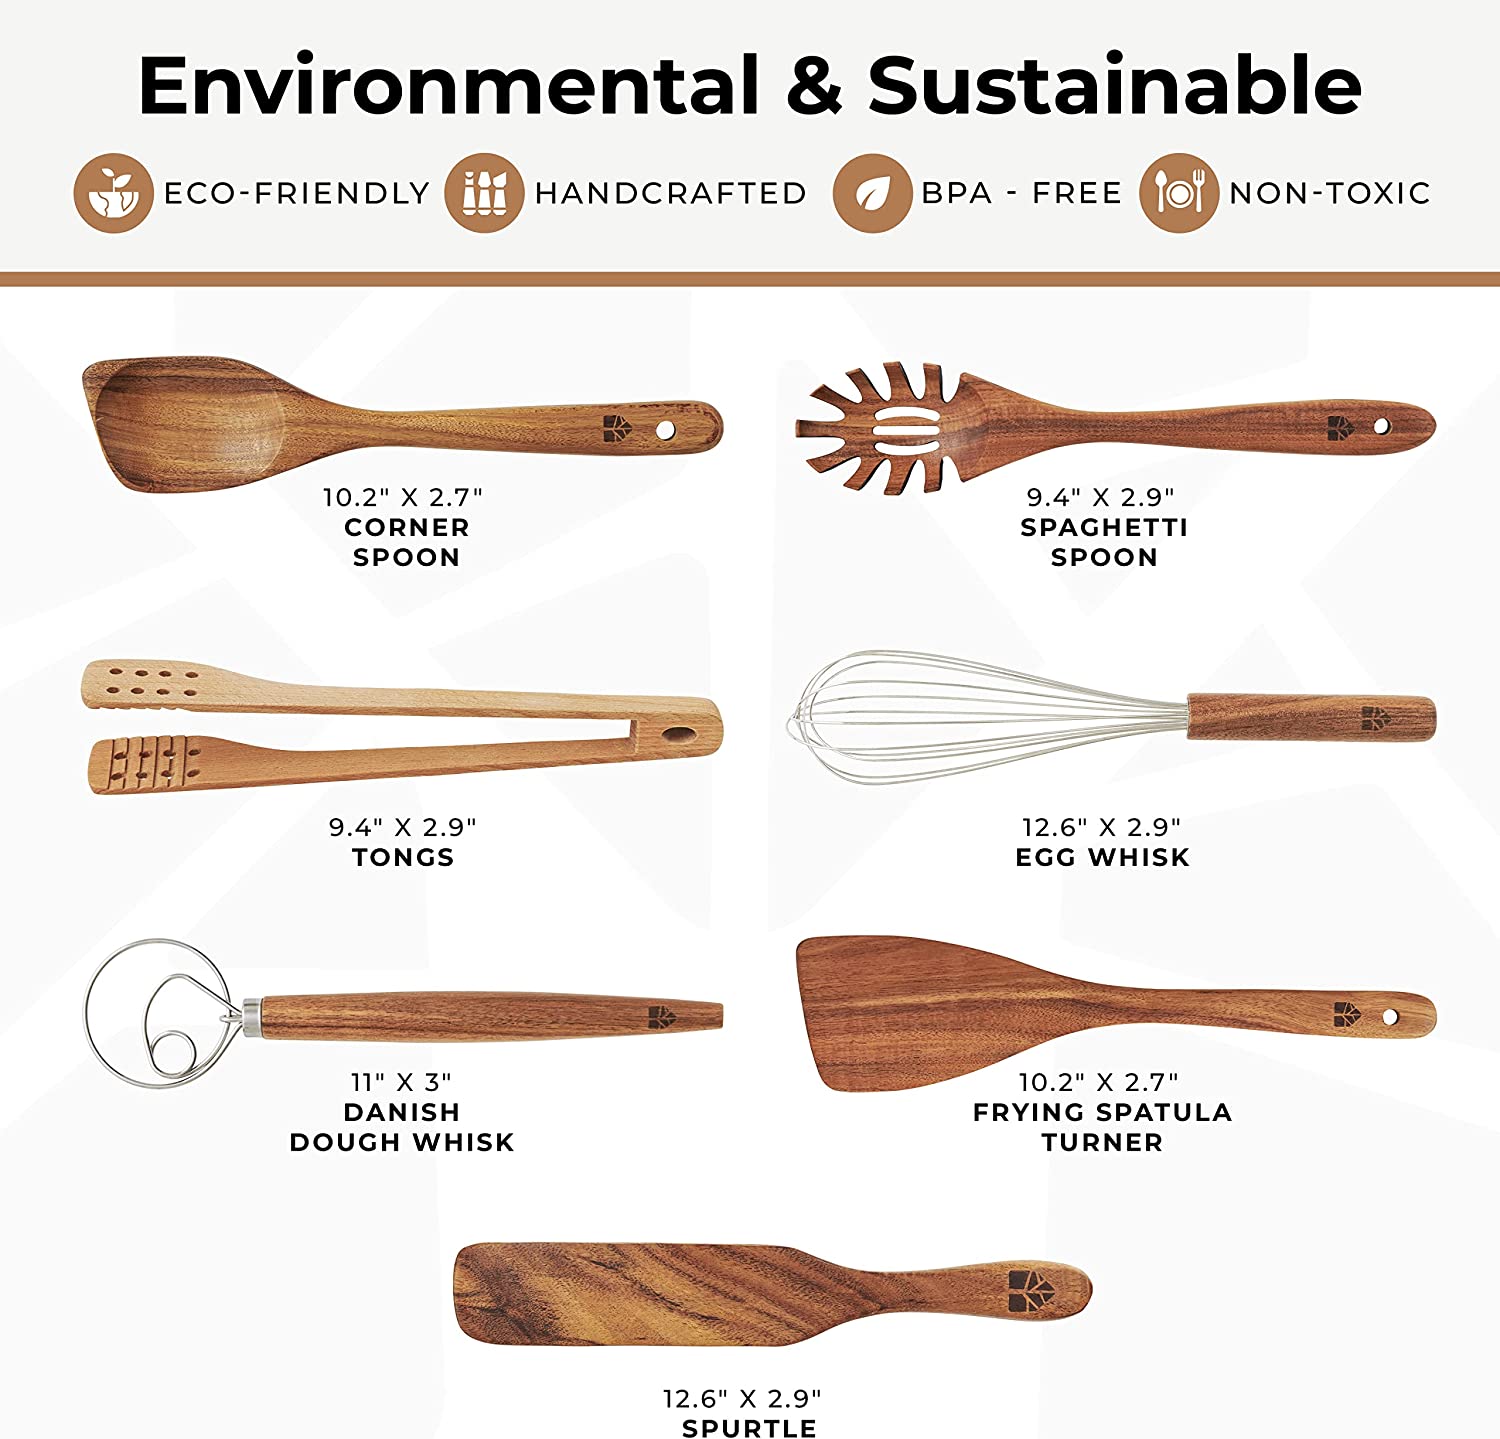 Wooden Spoons for Cooking, 8bPcs Teak Wood Cooking Utensil Set –  Woodenhouse Lifelong Quality